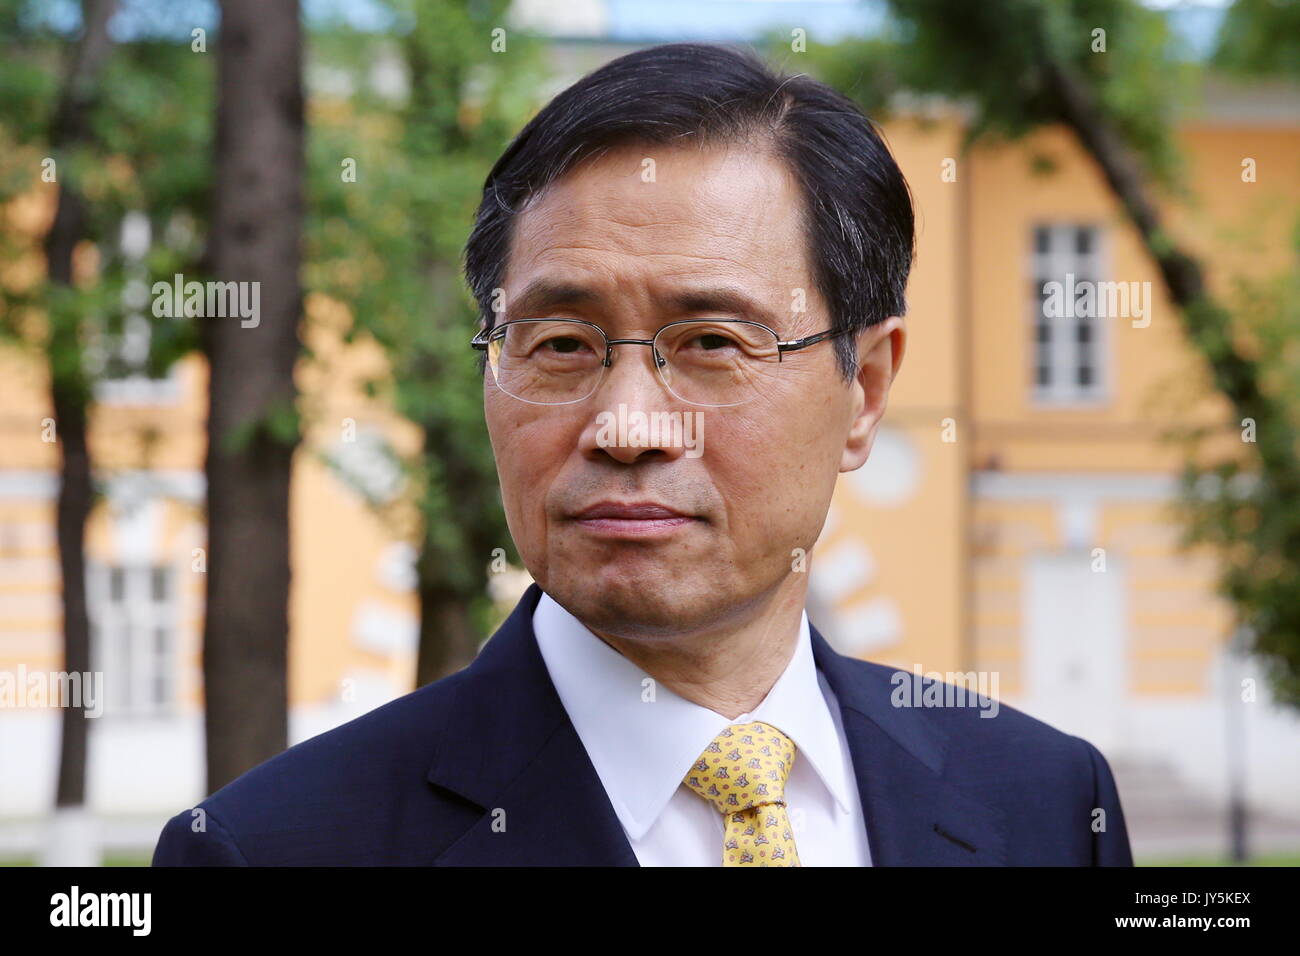 Moscow, Russia. 18th Aug, 2017. South Korea's Ambassador to Russia Park Ro-byug looks on ahead of a meeting with Russian Sport Minister Pavel Kolobkov. Credit: Vladimir Gerdo/TASS/Alamy Live News Stock Photo